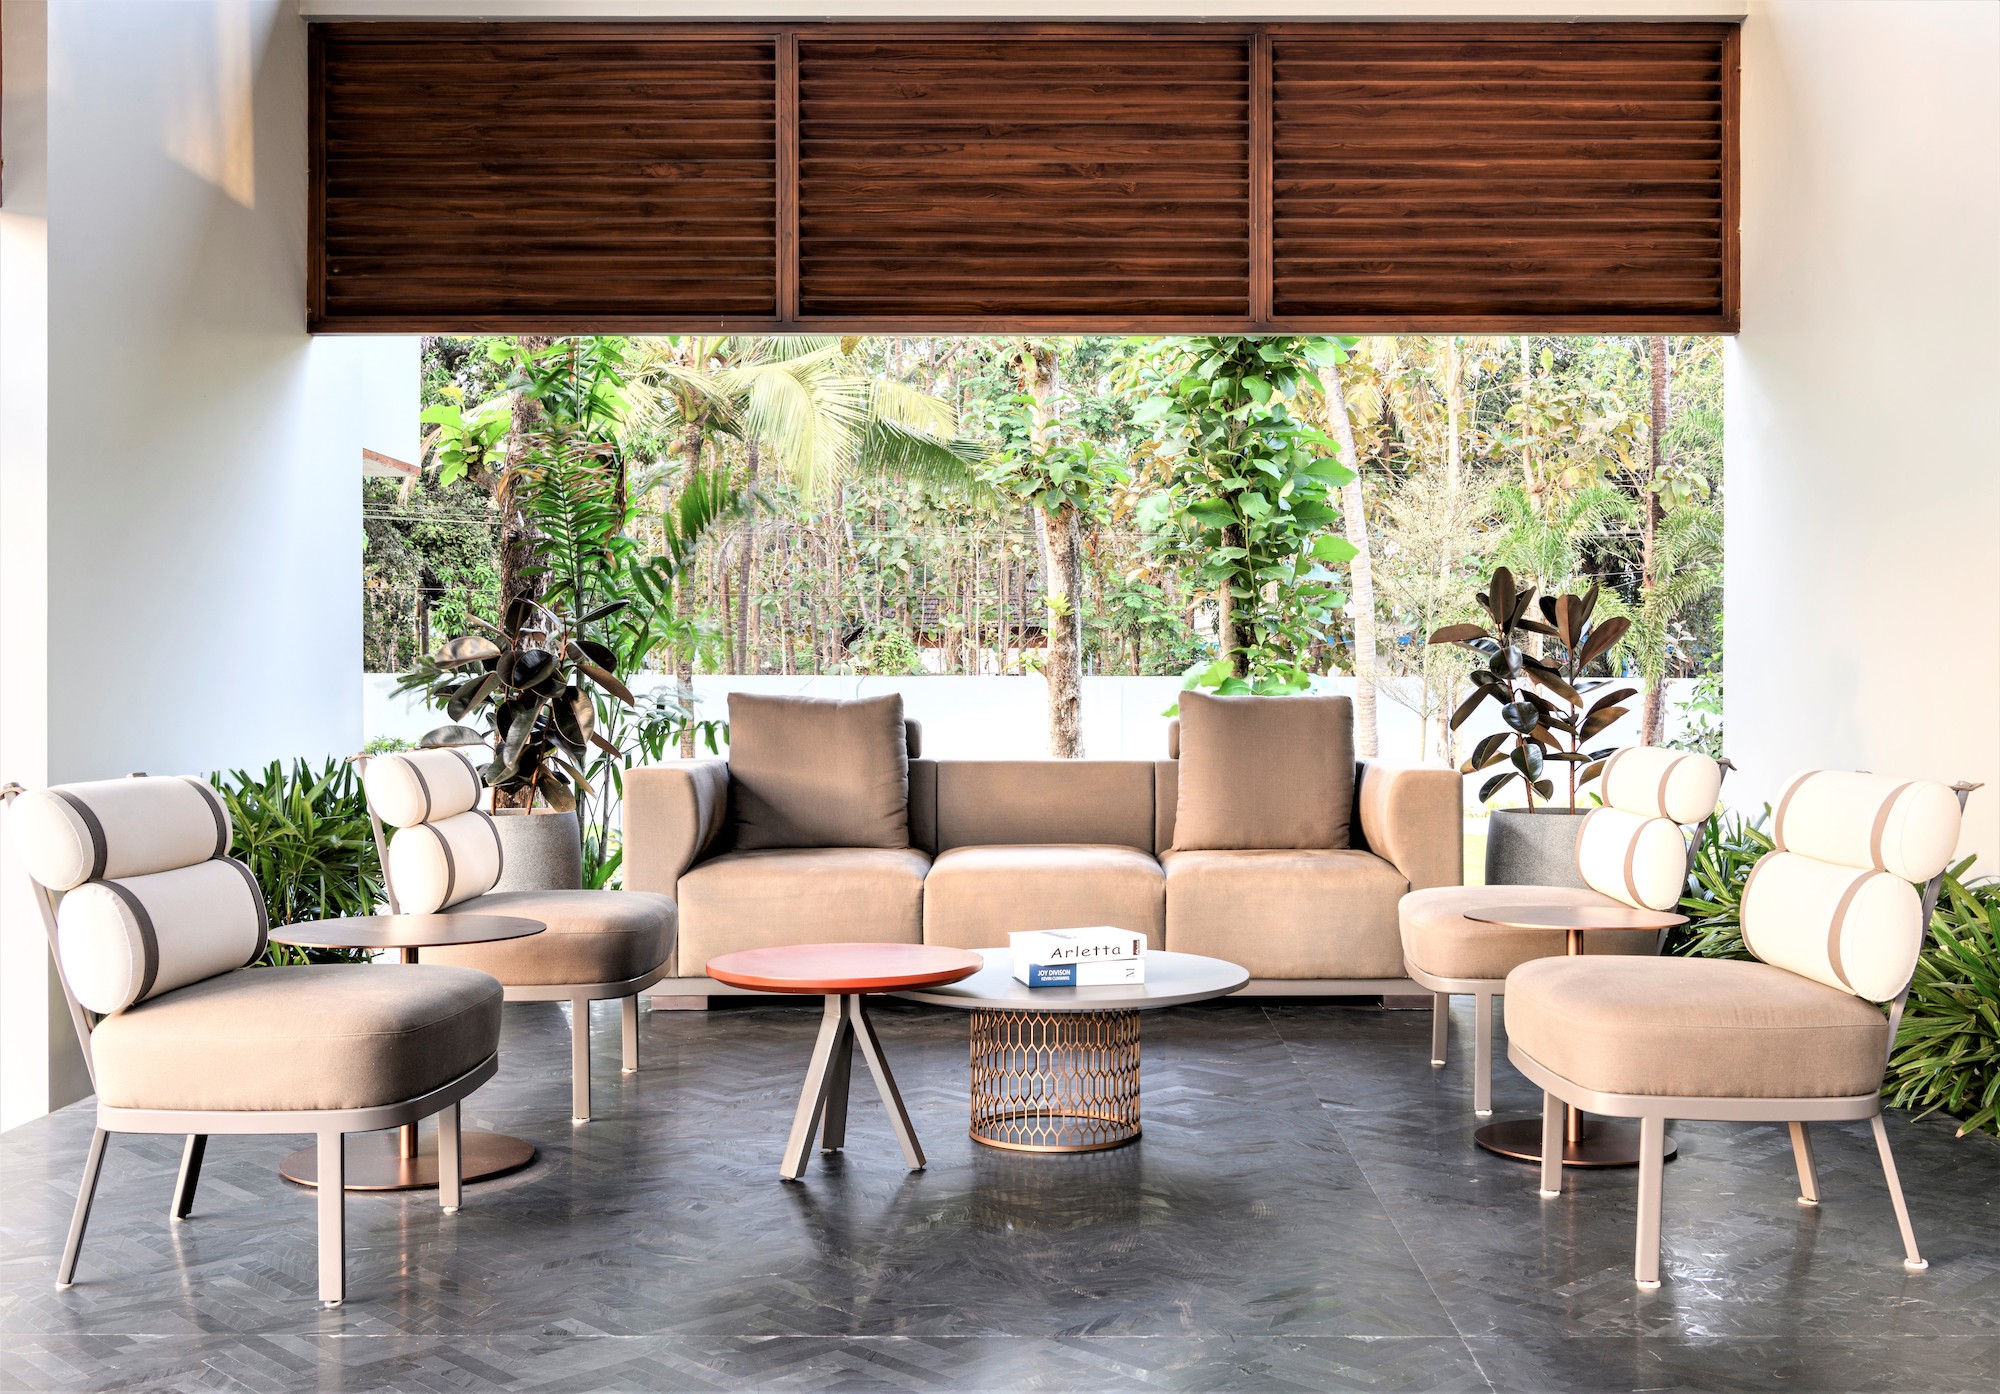 Reception area at 'Art Mansion' project by Indian designers Arun Shekar and Mohammed Afnan in Effect Magazine